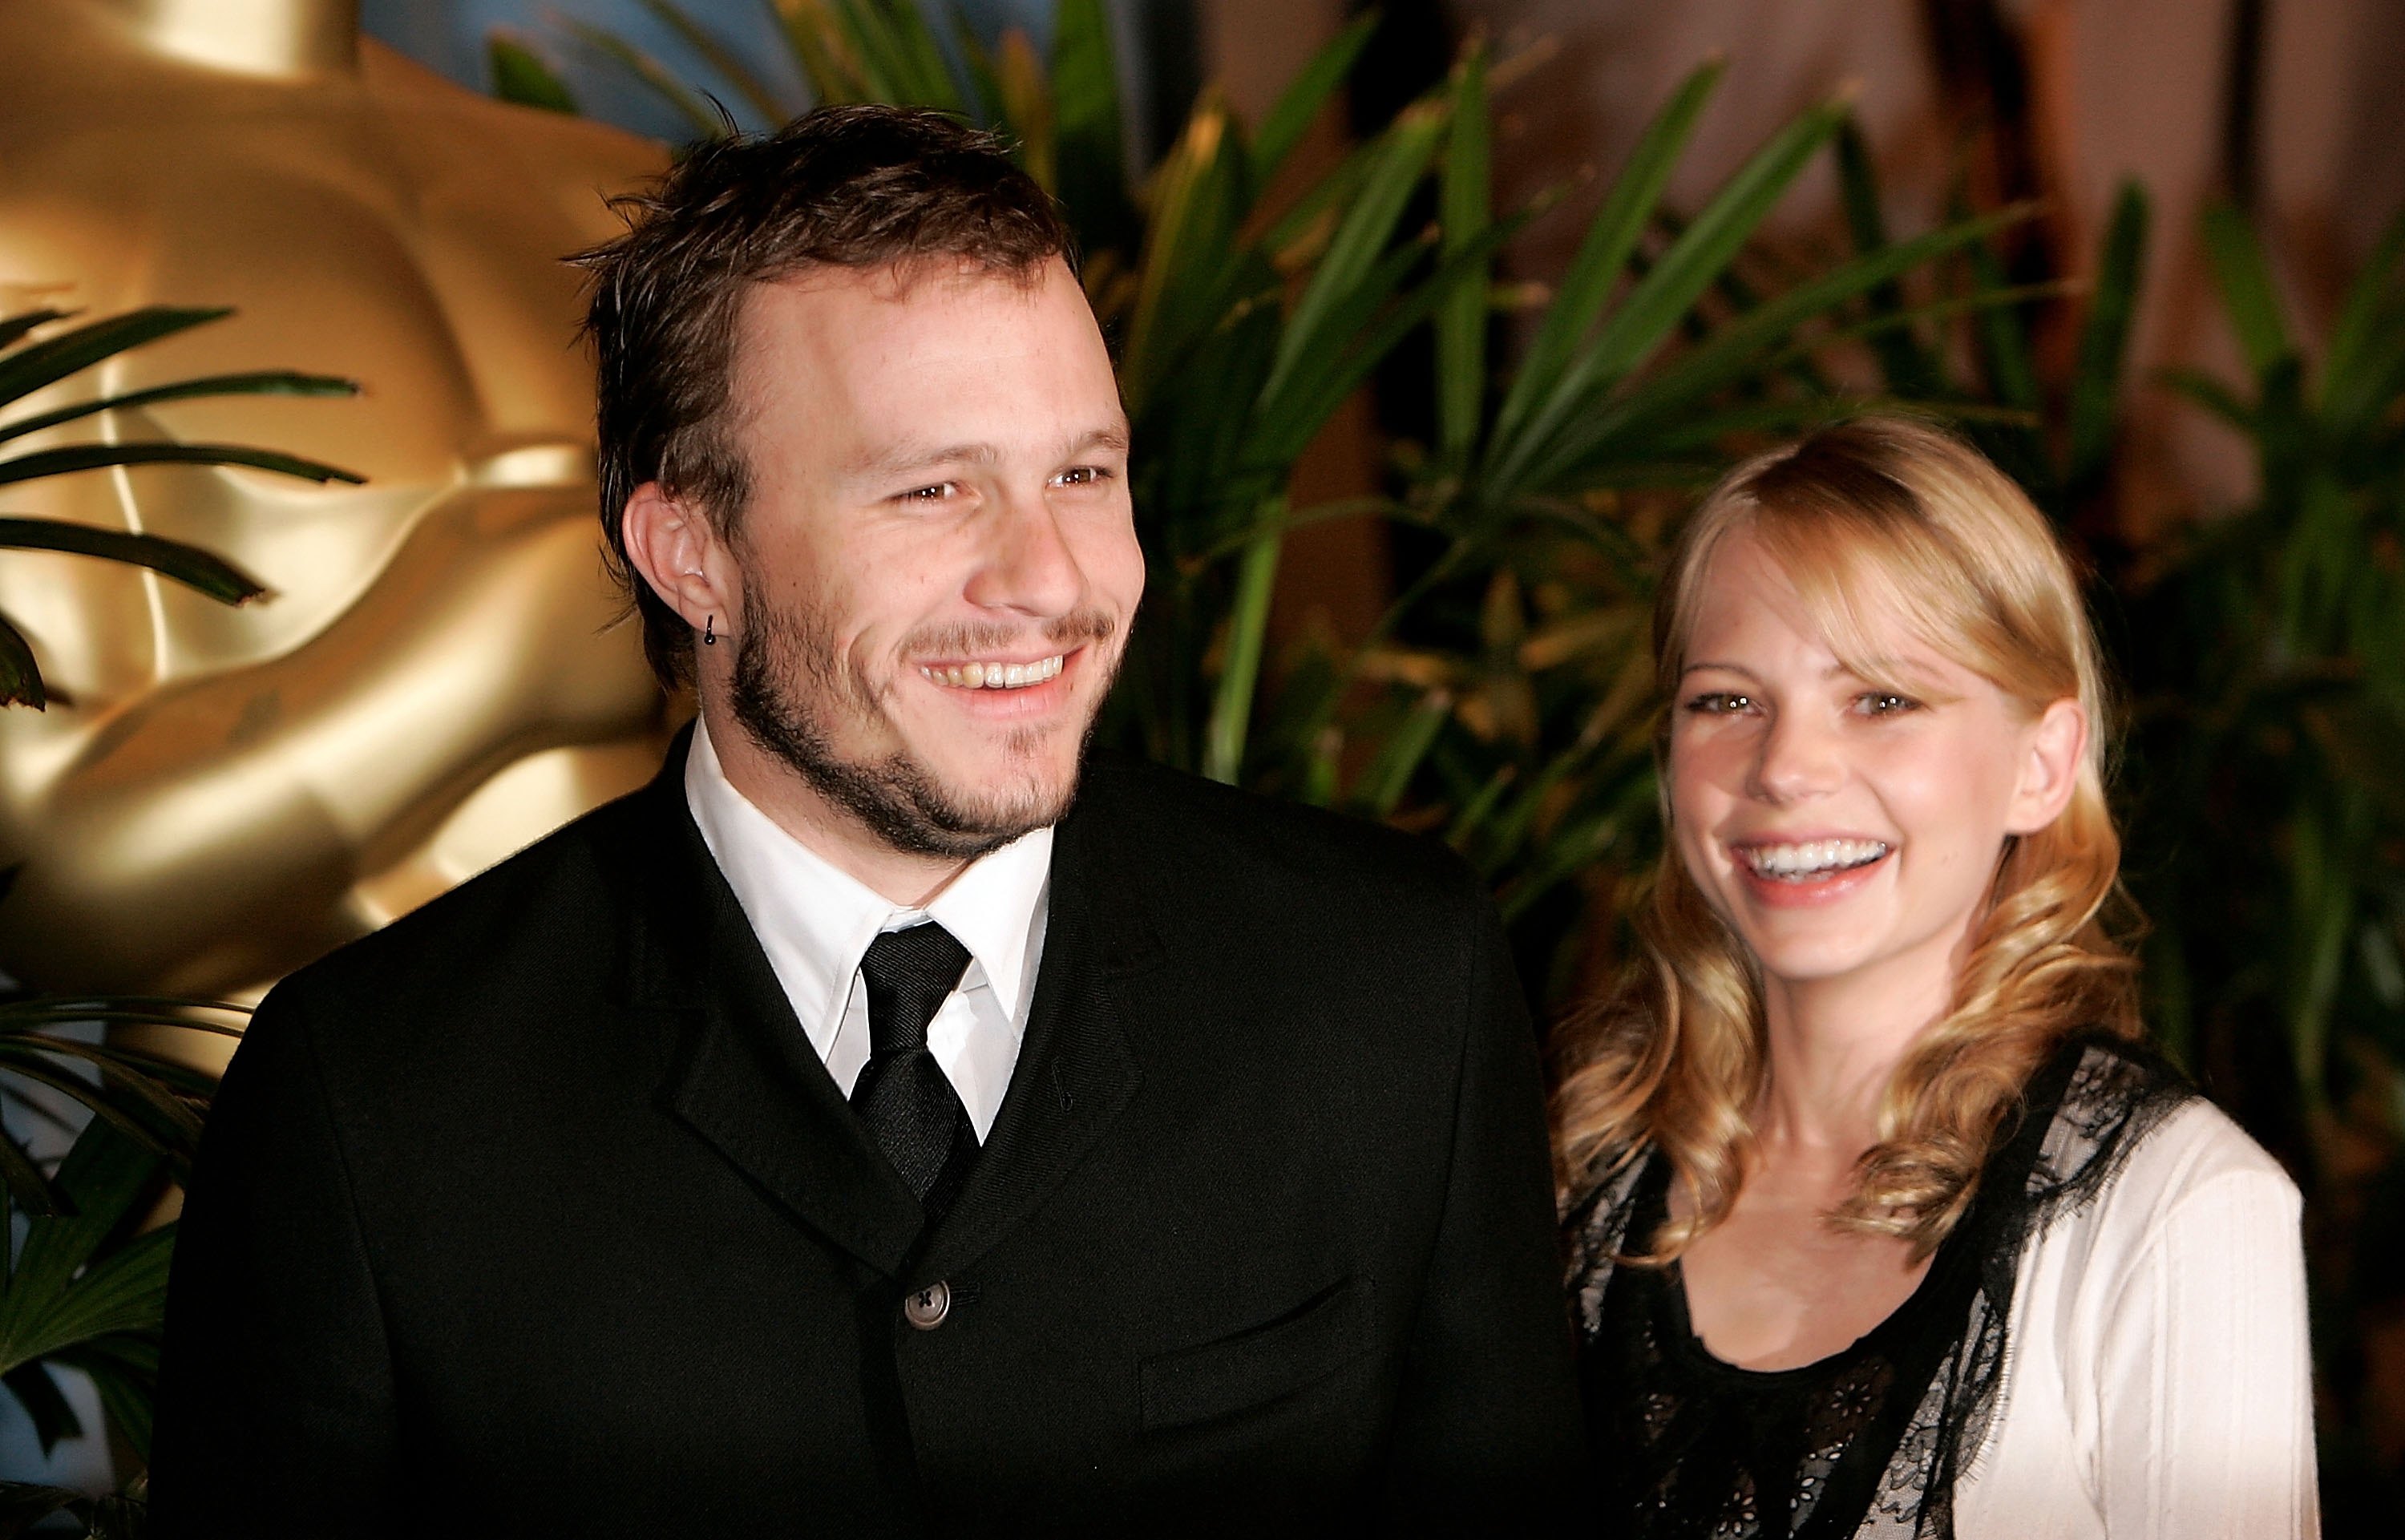 Heath Ledger and Michelle Williams at the Oscar Nominees Luncheon in Beverly Hills, California on February 13, 2006 | Source: Getty Images